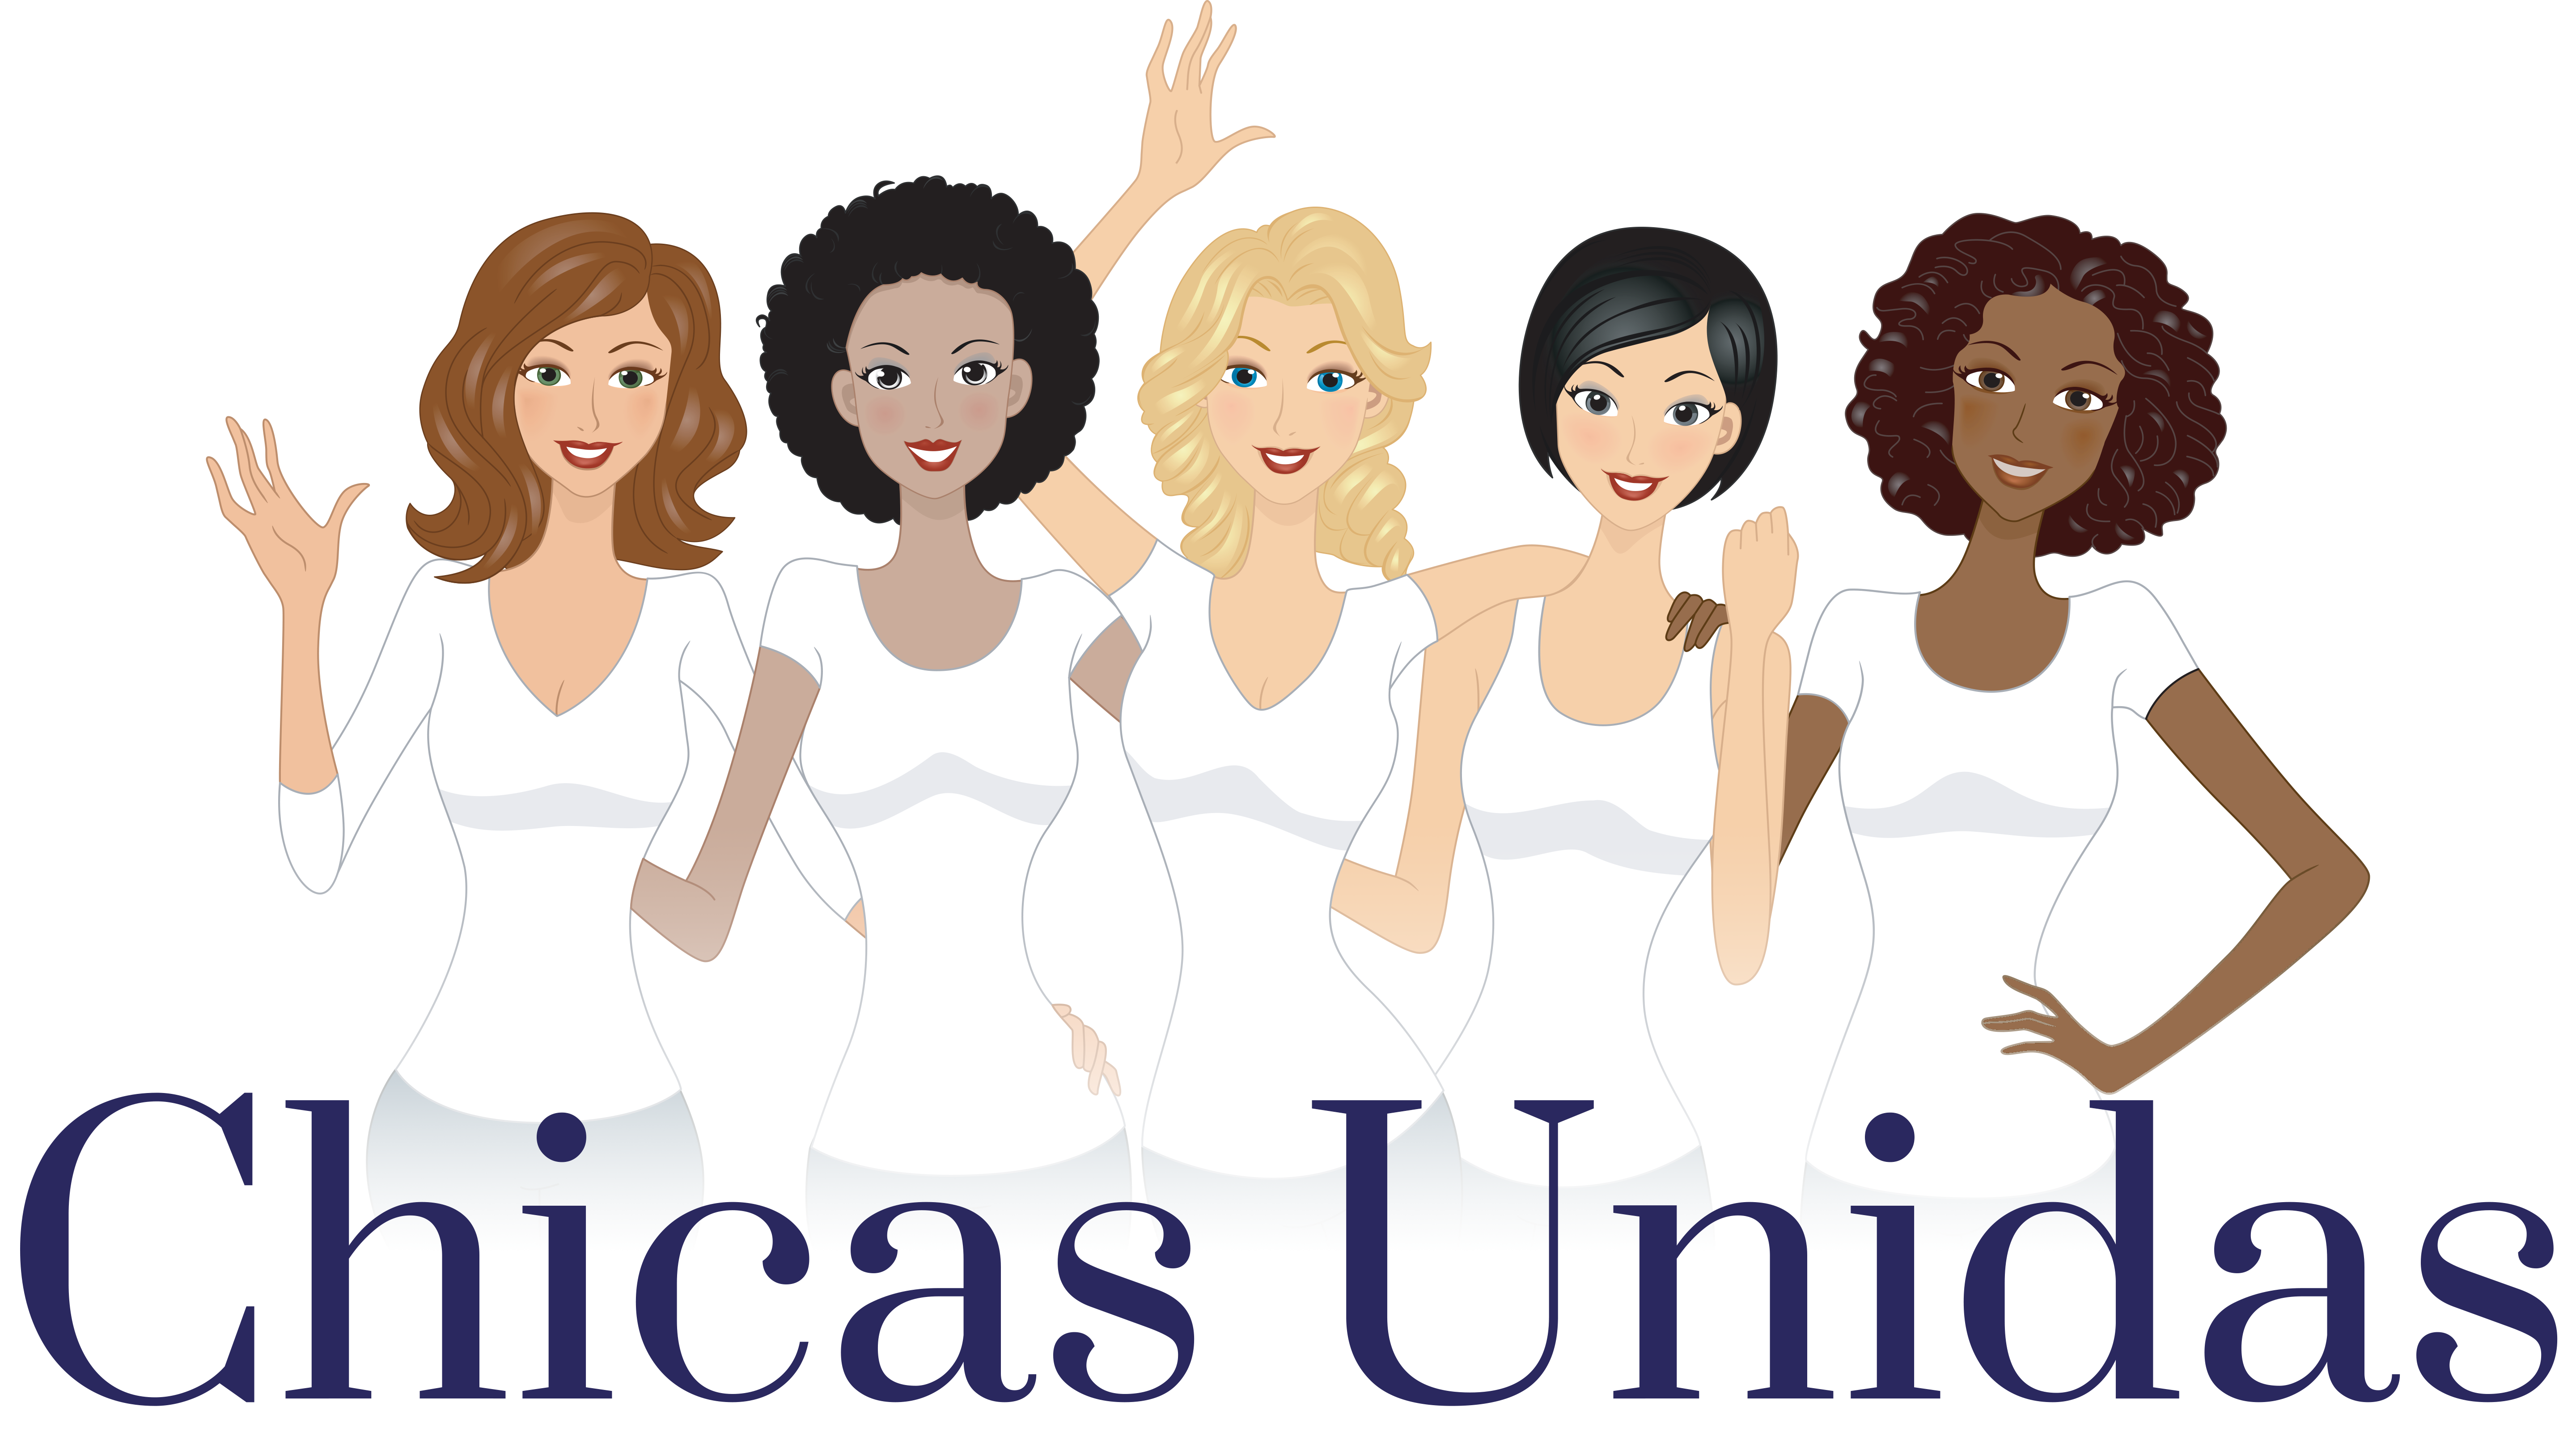 Presented by MyJane, Chicas Unidas is a bilingual virtual event  created to explore plant-based wellness and female empowerment through a kaleidoscope of speakers and entertainers.